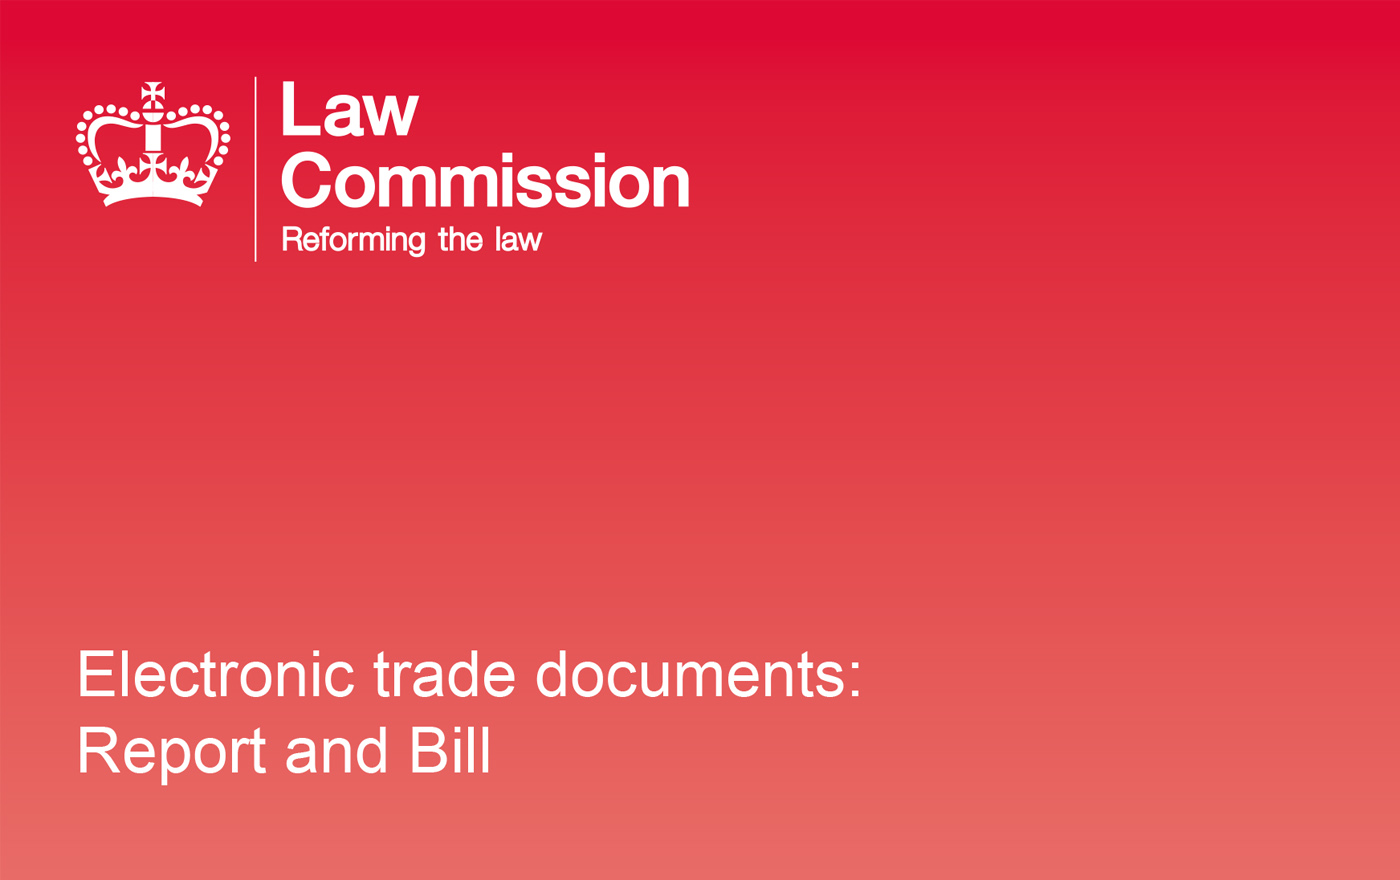 Key Contributions Made to the Work of The Law Commission